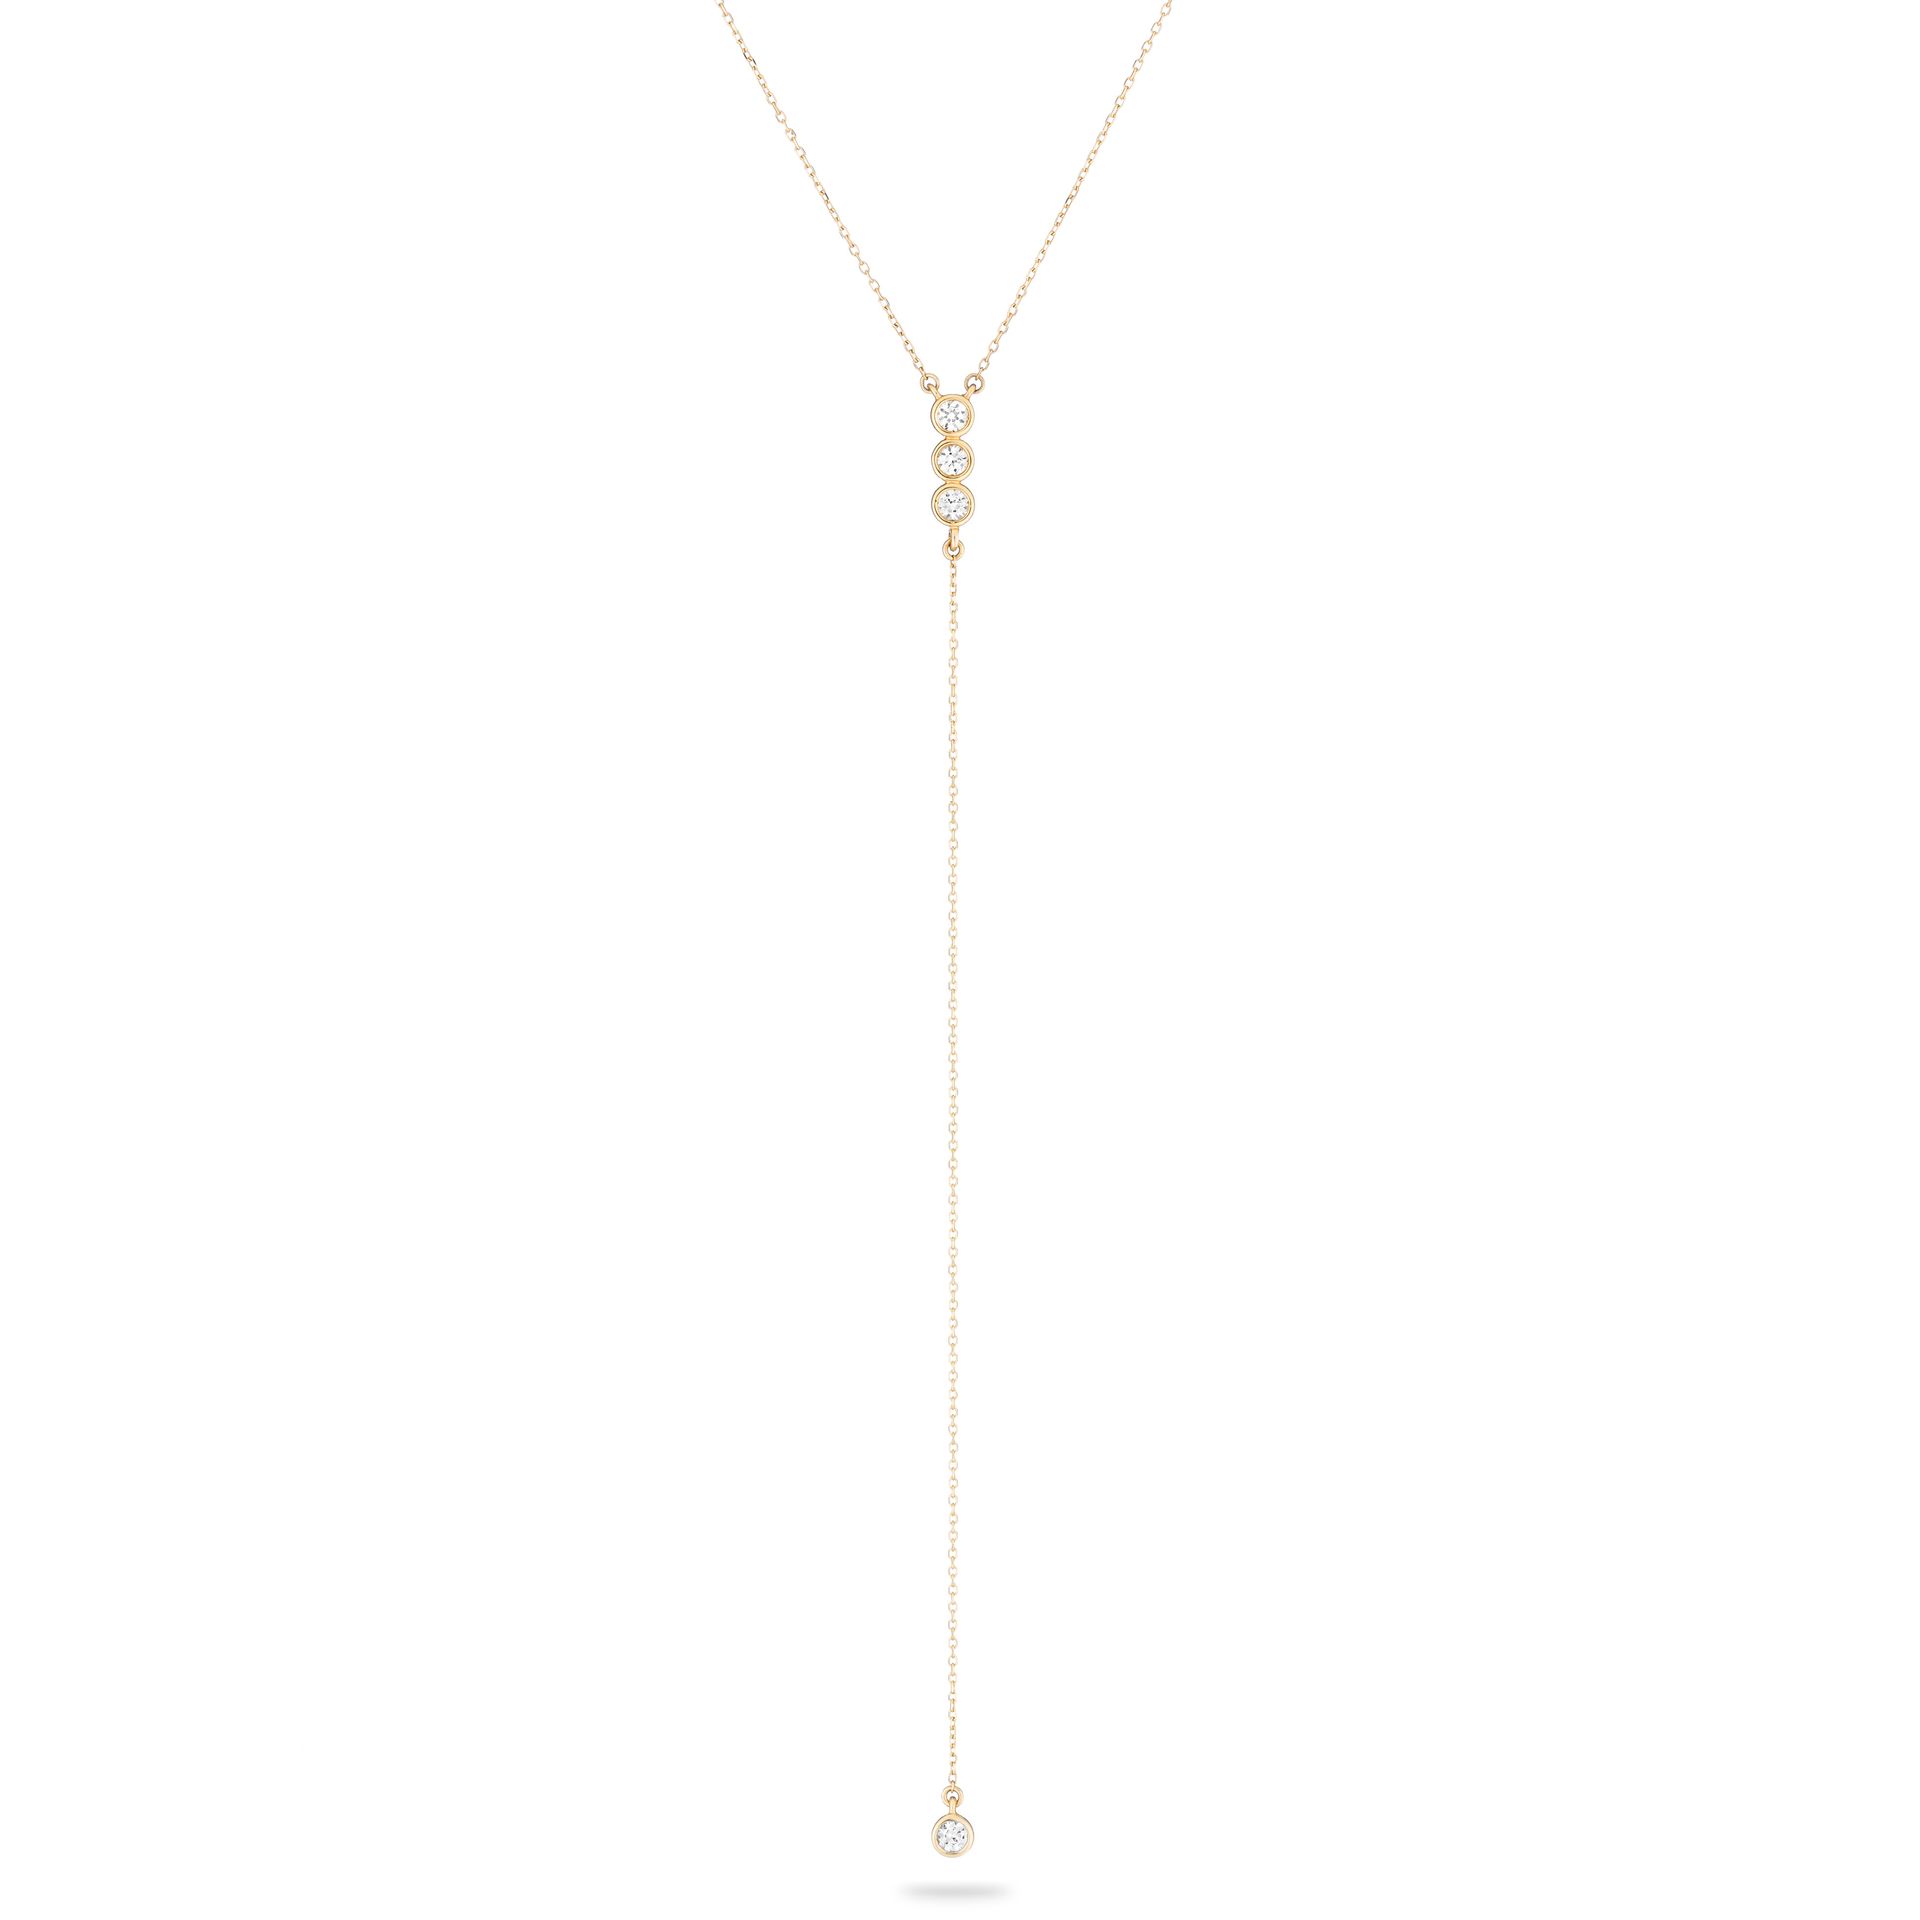 Dainty Jewelry Lovers, This New Collection Is for You | Who What Wear